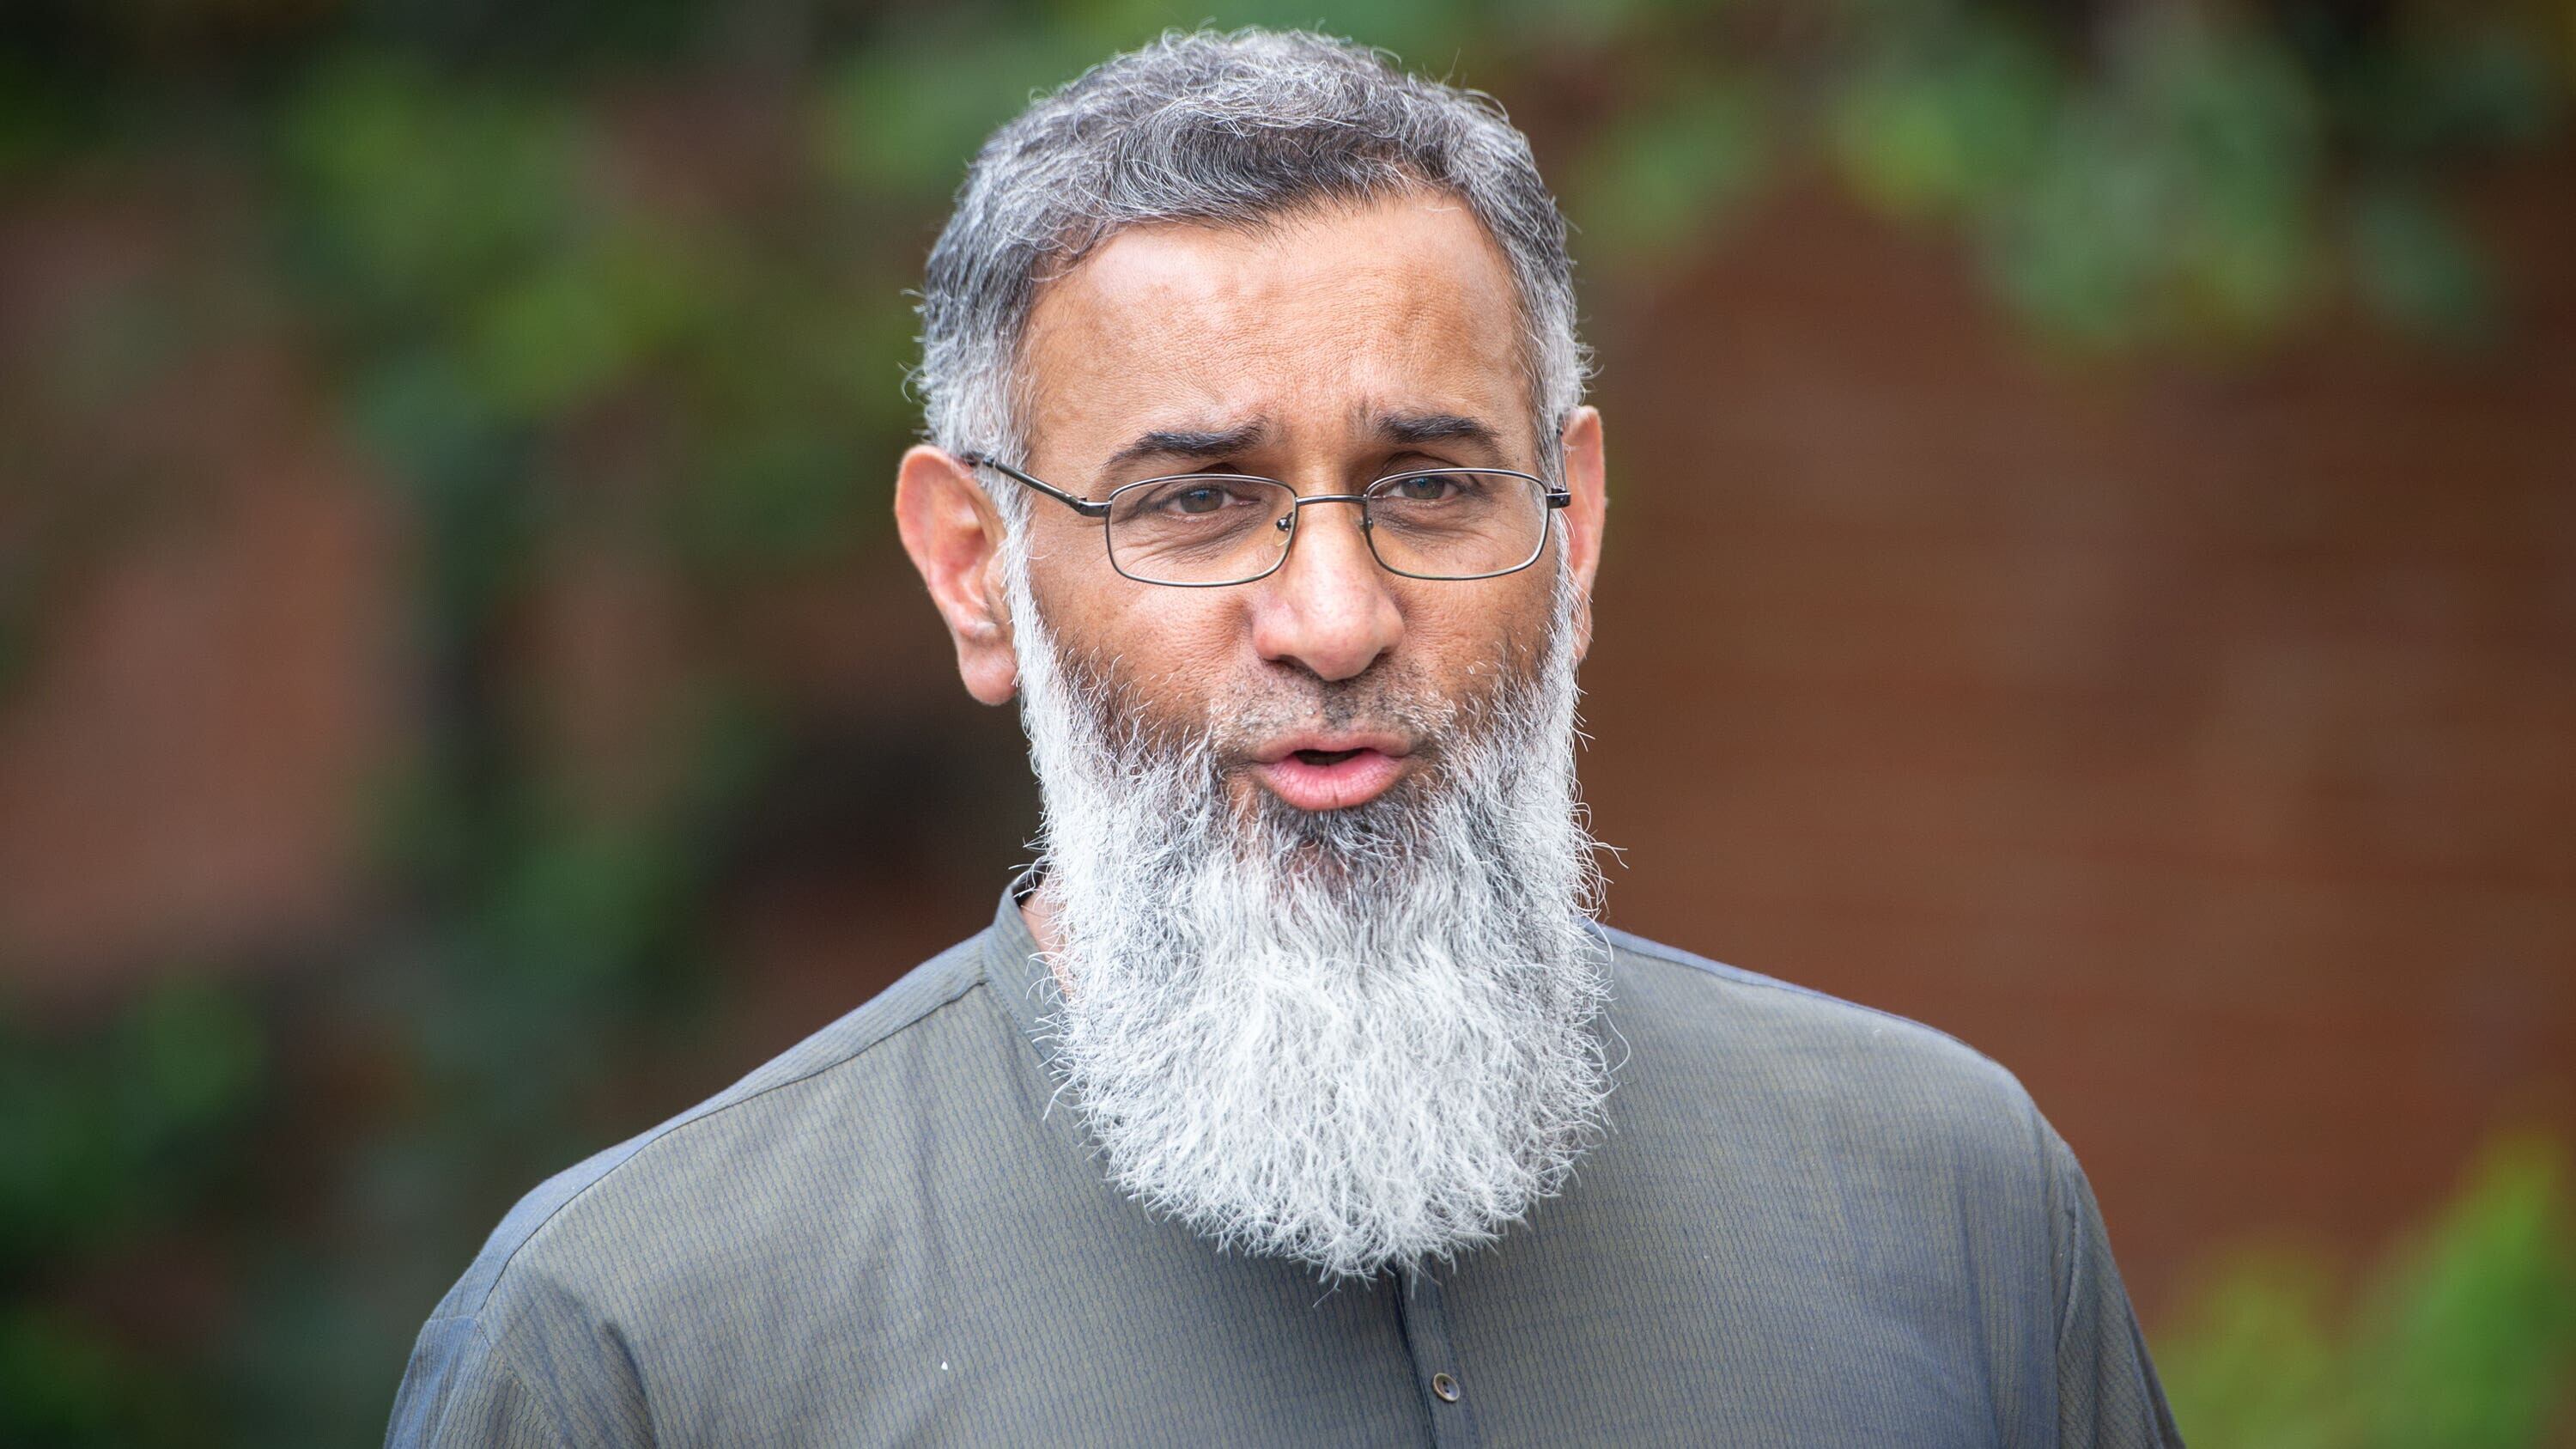 Anjem Choudary has been charged with three terror offences, police have said (PA)